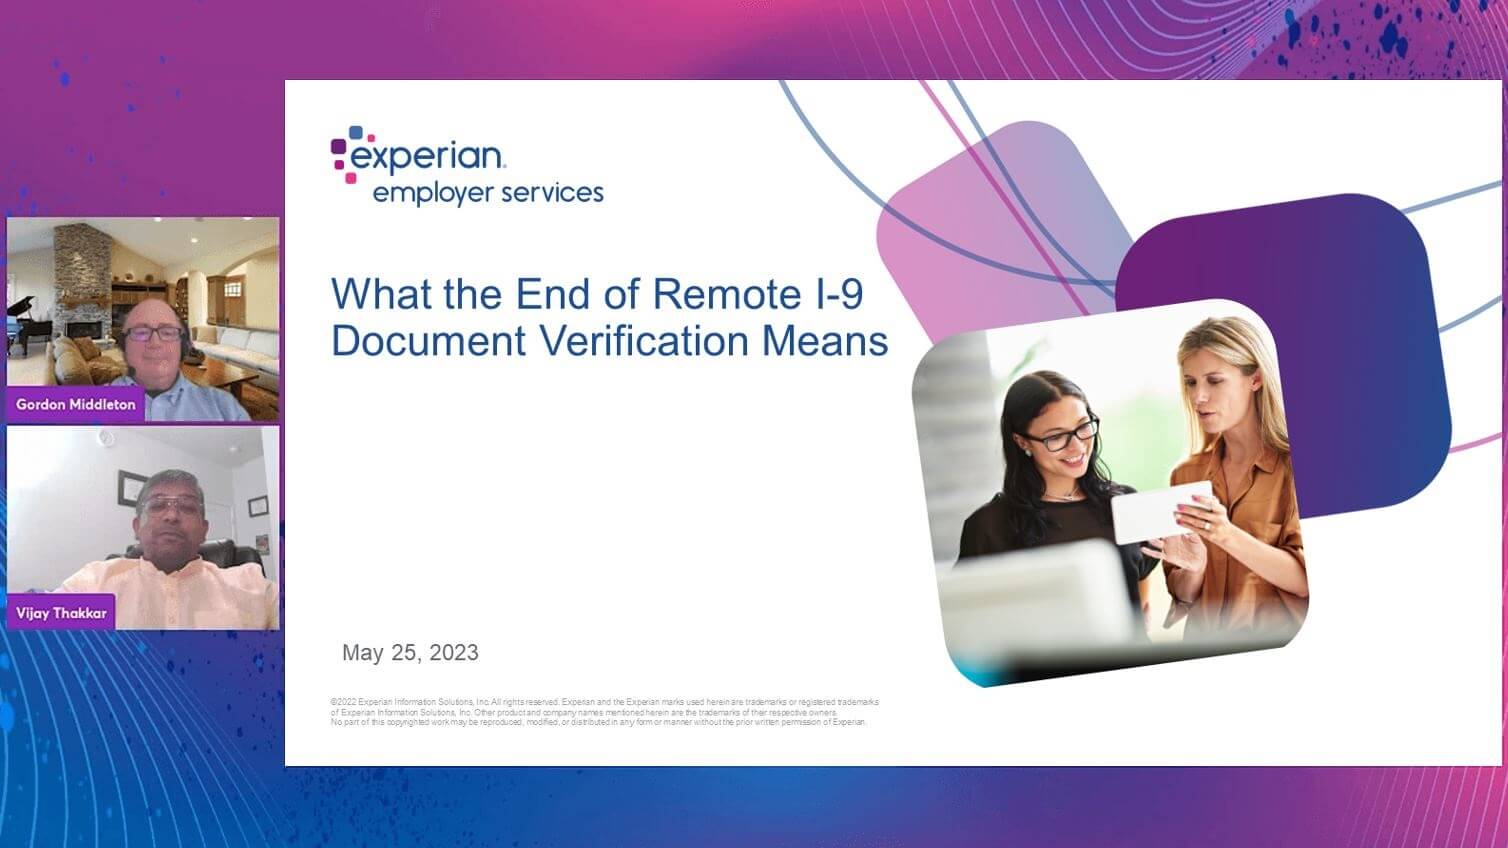 What the End of Remote I-9 Document Verification Means